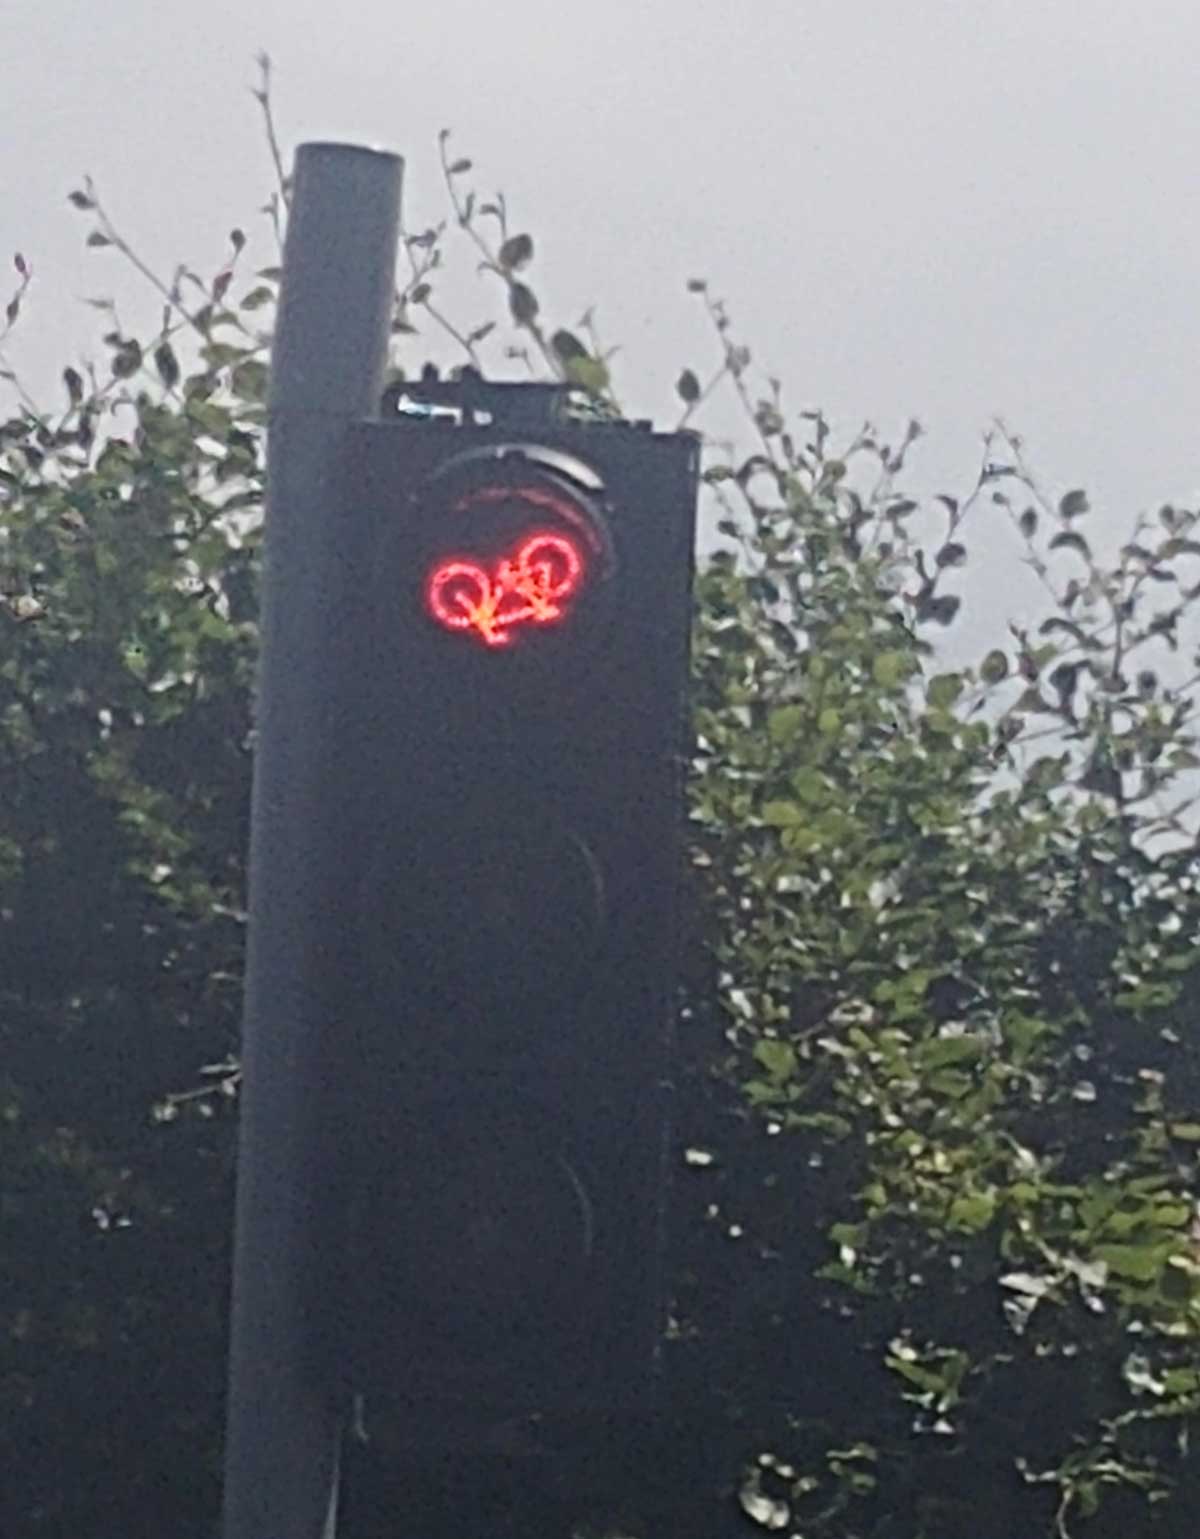 Go home traffic light, you're drunk